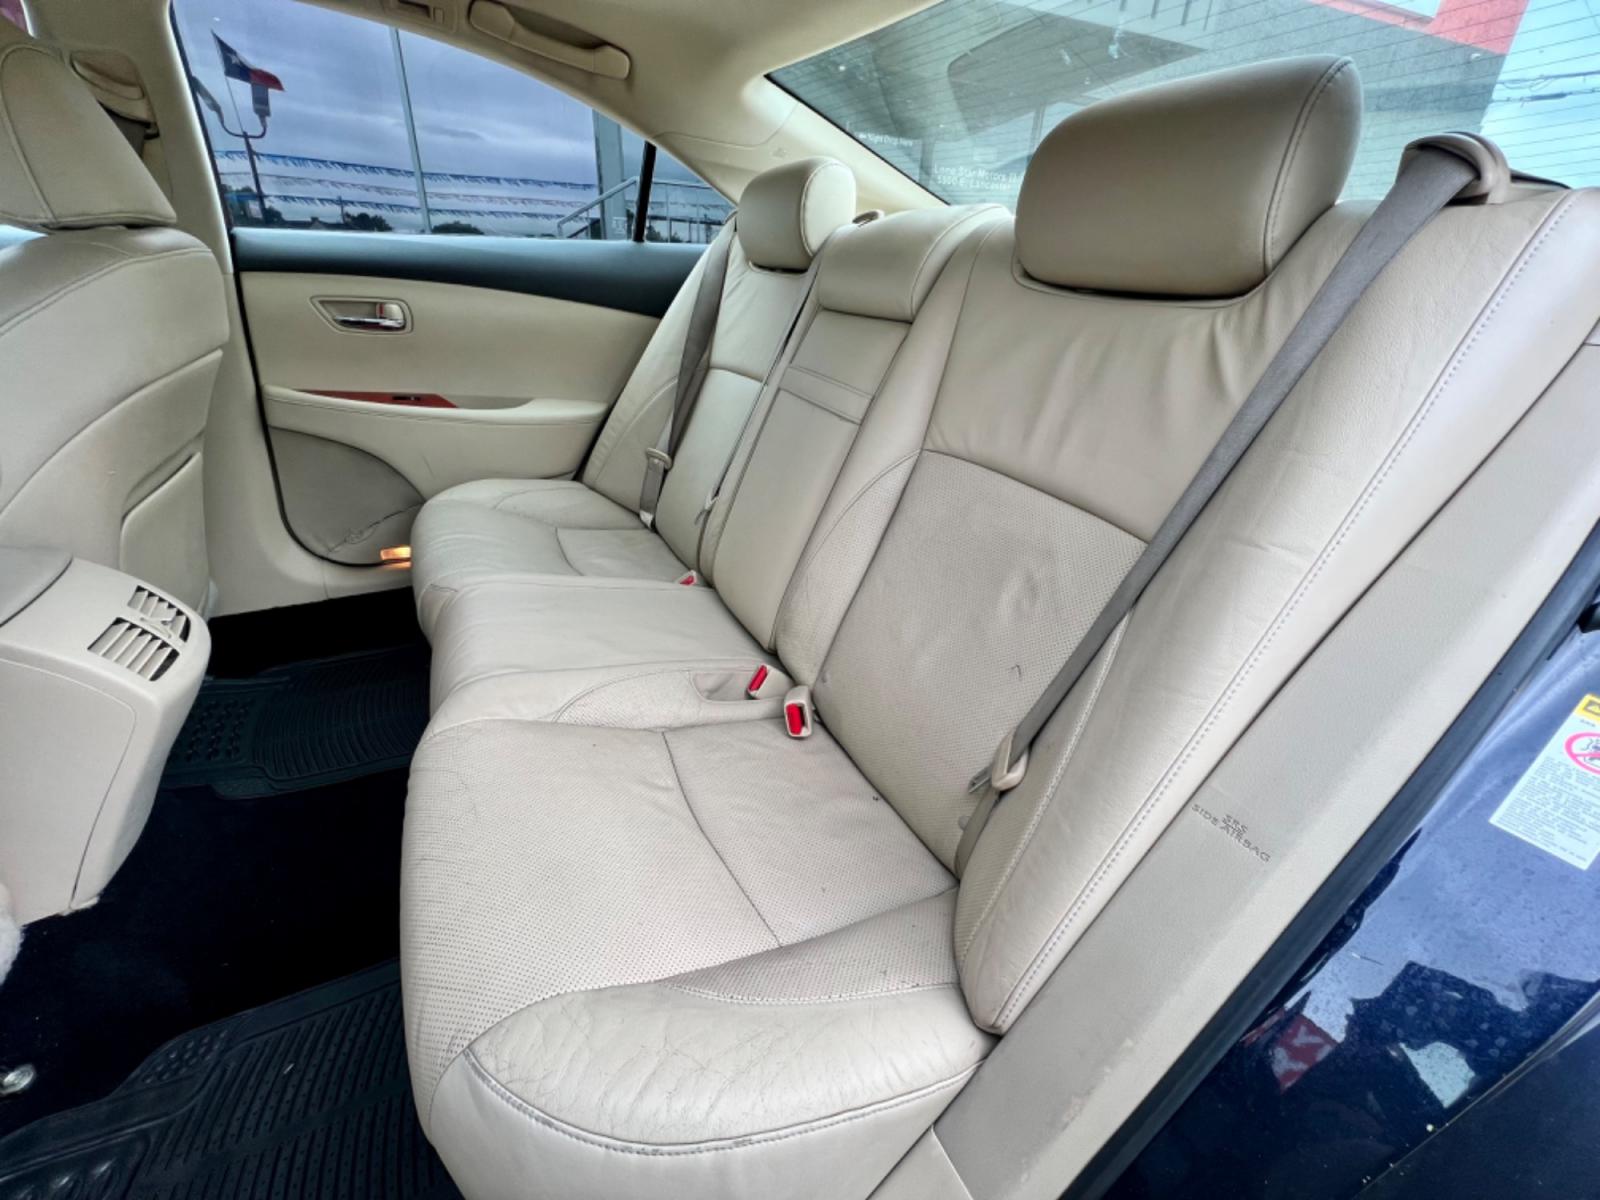 2008 BLUE LEXUS ES 350 (JTHBJ46G682) , located at 5900 E. Lancaster Ave., Fort Worth, TX, 76112, (817) 457-5456, 0.000000, 0.000000 - This is a 2008 LEXUS ES350 LUXURY 4 DR SEDAN that is in excellent condition. The interior is clean with no rips or tears or stains. All power windows, door locks and seats. Ice cold AC for those hot Texas summer days. It is equipped with a CD player, AM/FM radio. It runs and drives like new. The tir - Photo #11